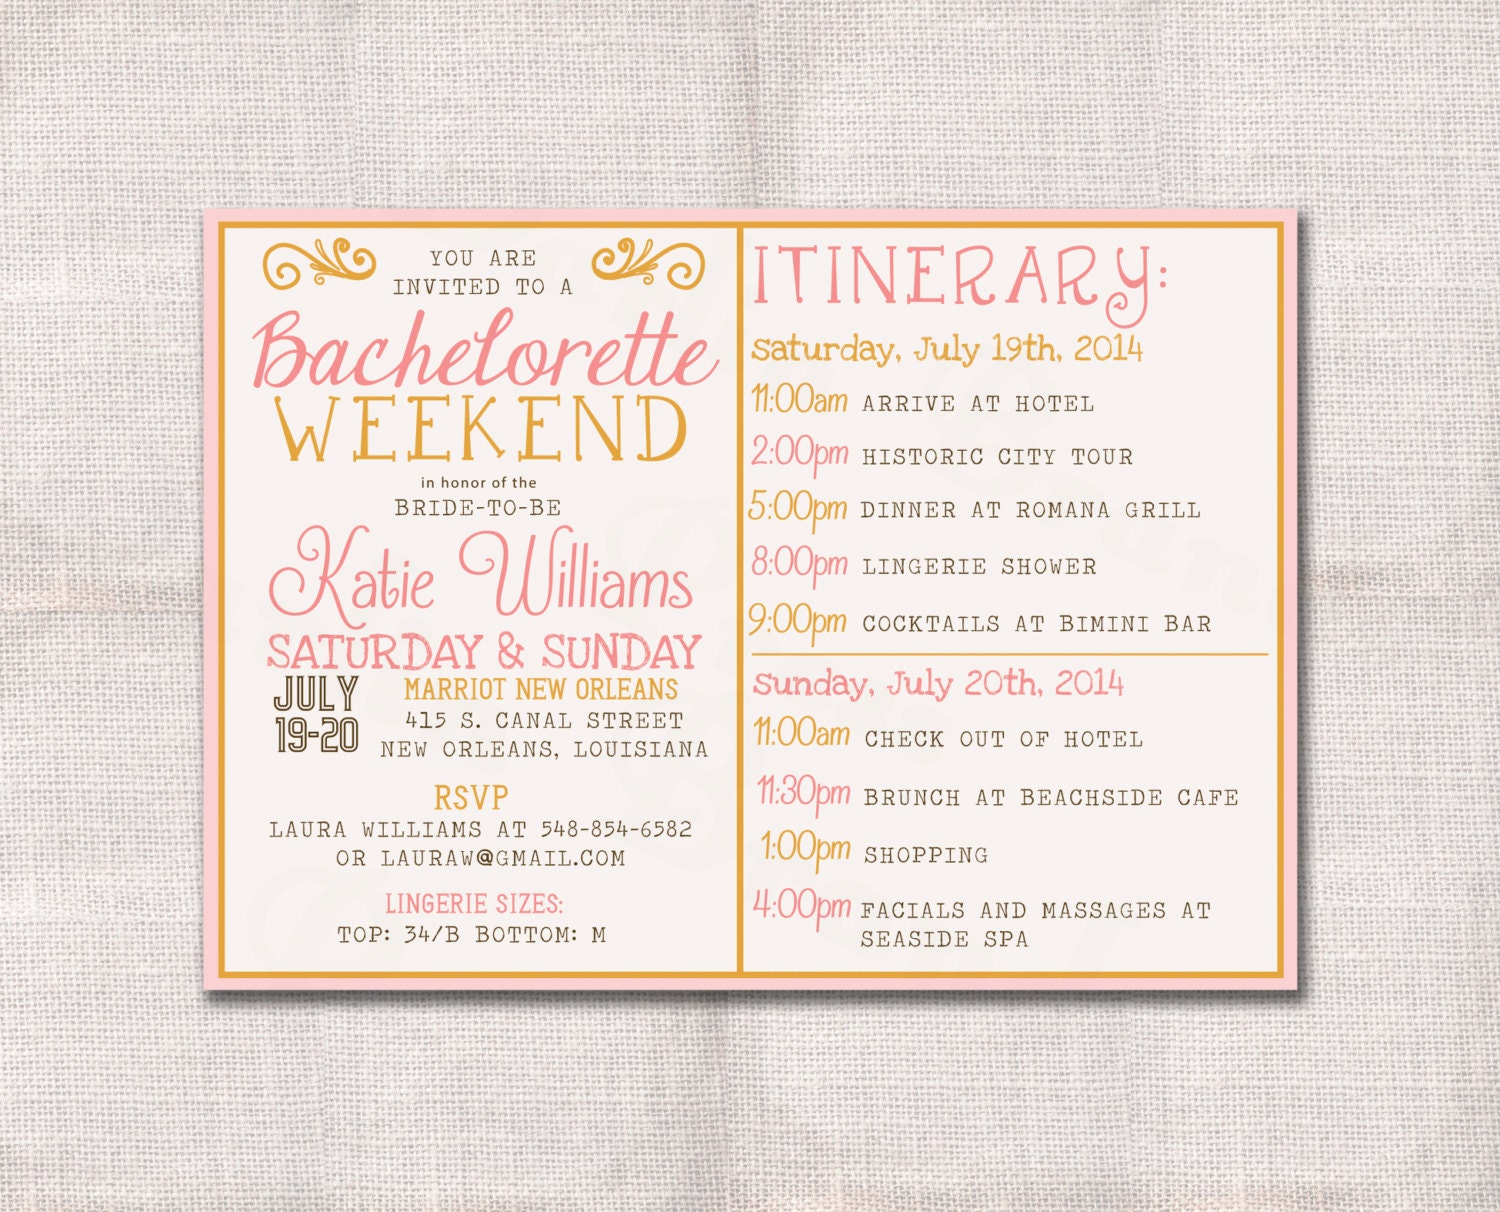 Bachelorette Party Invitations With Itinerary 3